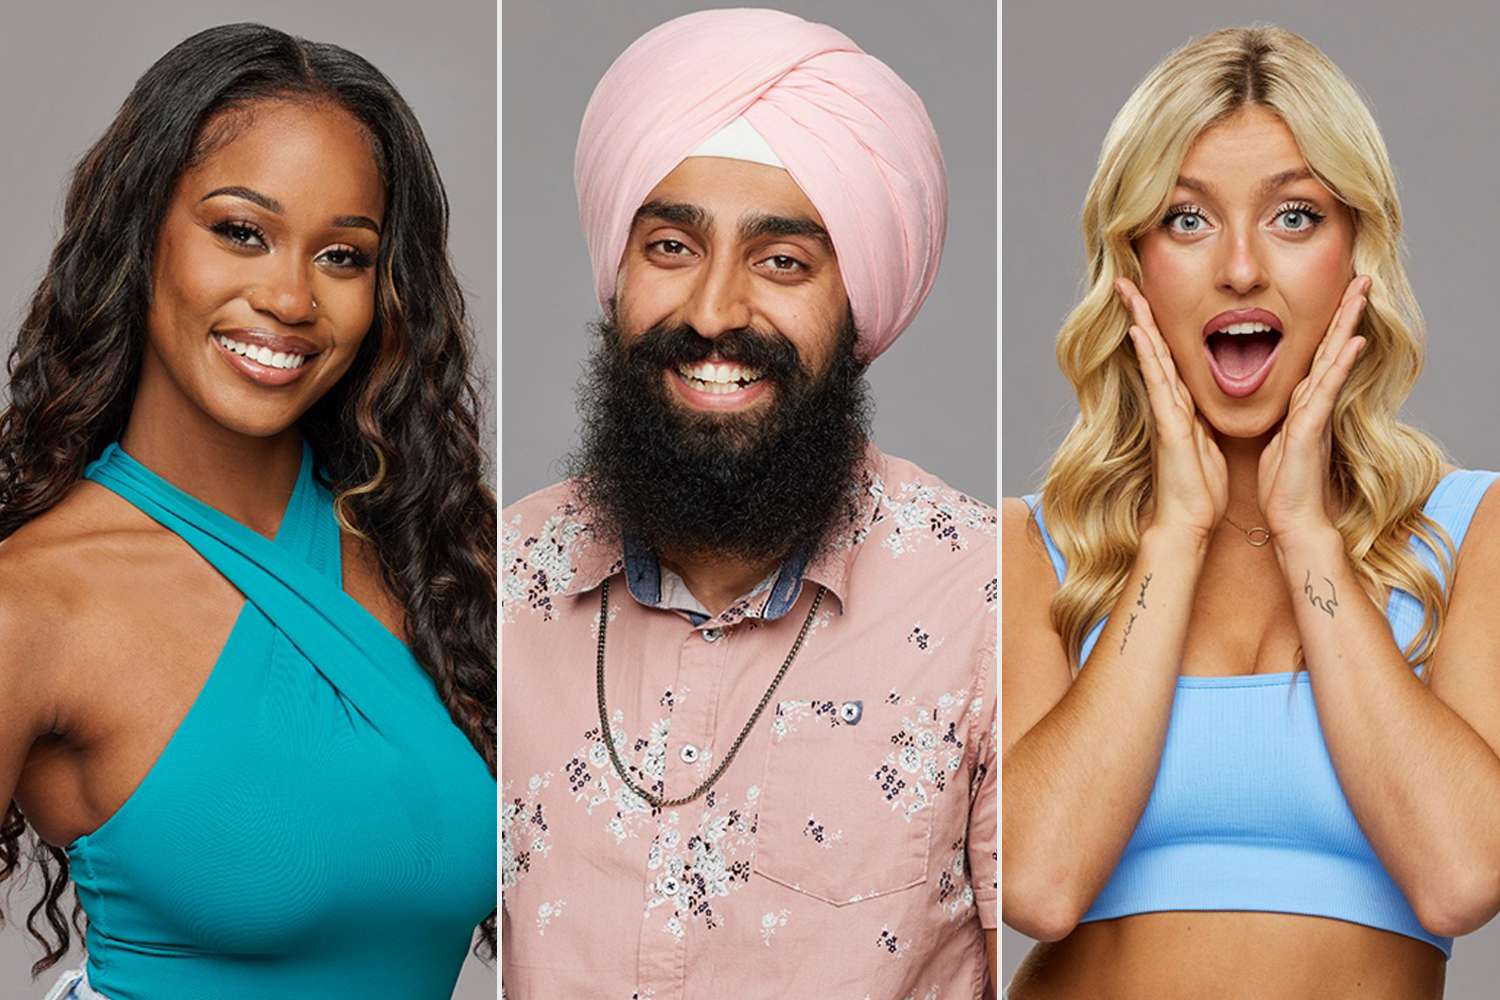 Meet the cast of 'Big Brother 25'